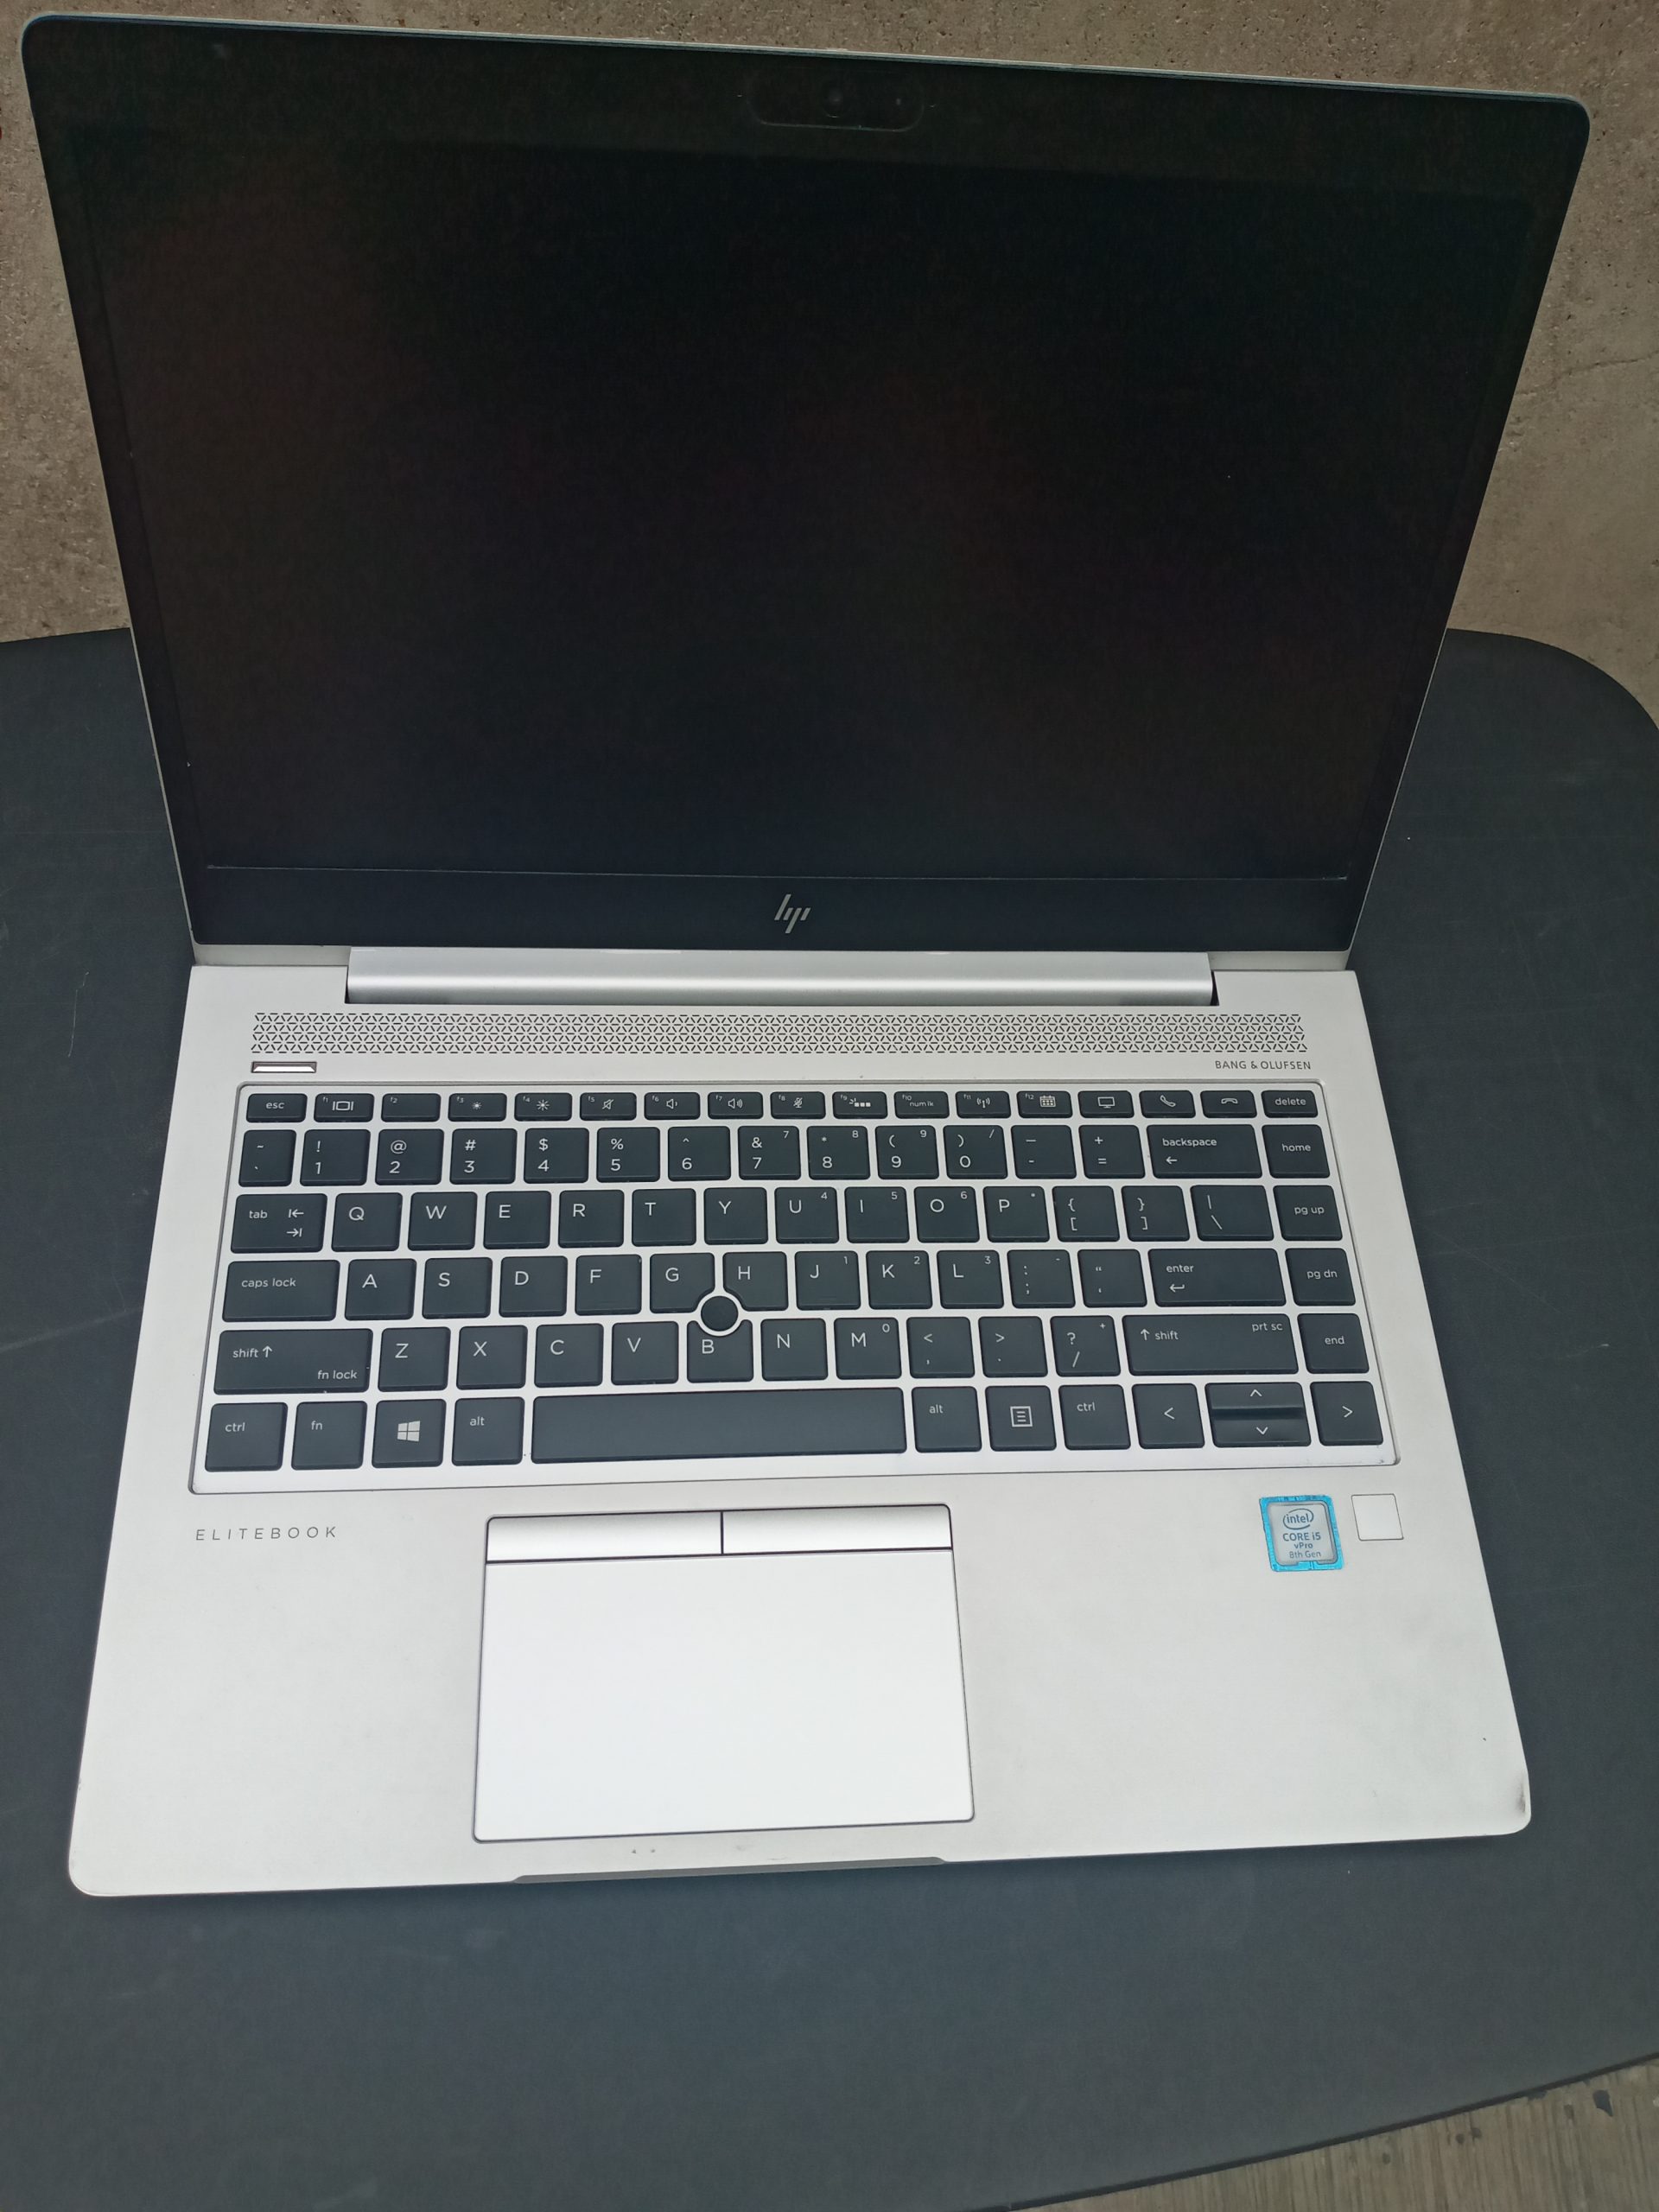 hp elite book 840 g5 eight generation for sale in lagos nigeria, uk used laptops for sale , laptop for sale, latest price for used laptops in lagos nigeria, price for used hp 840 g5 in lagos , affordable HP 840 G5 FOR SALE in lagos